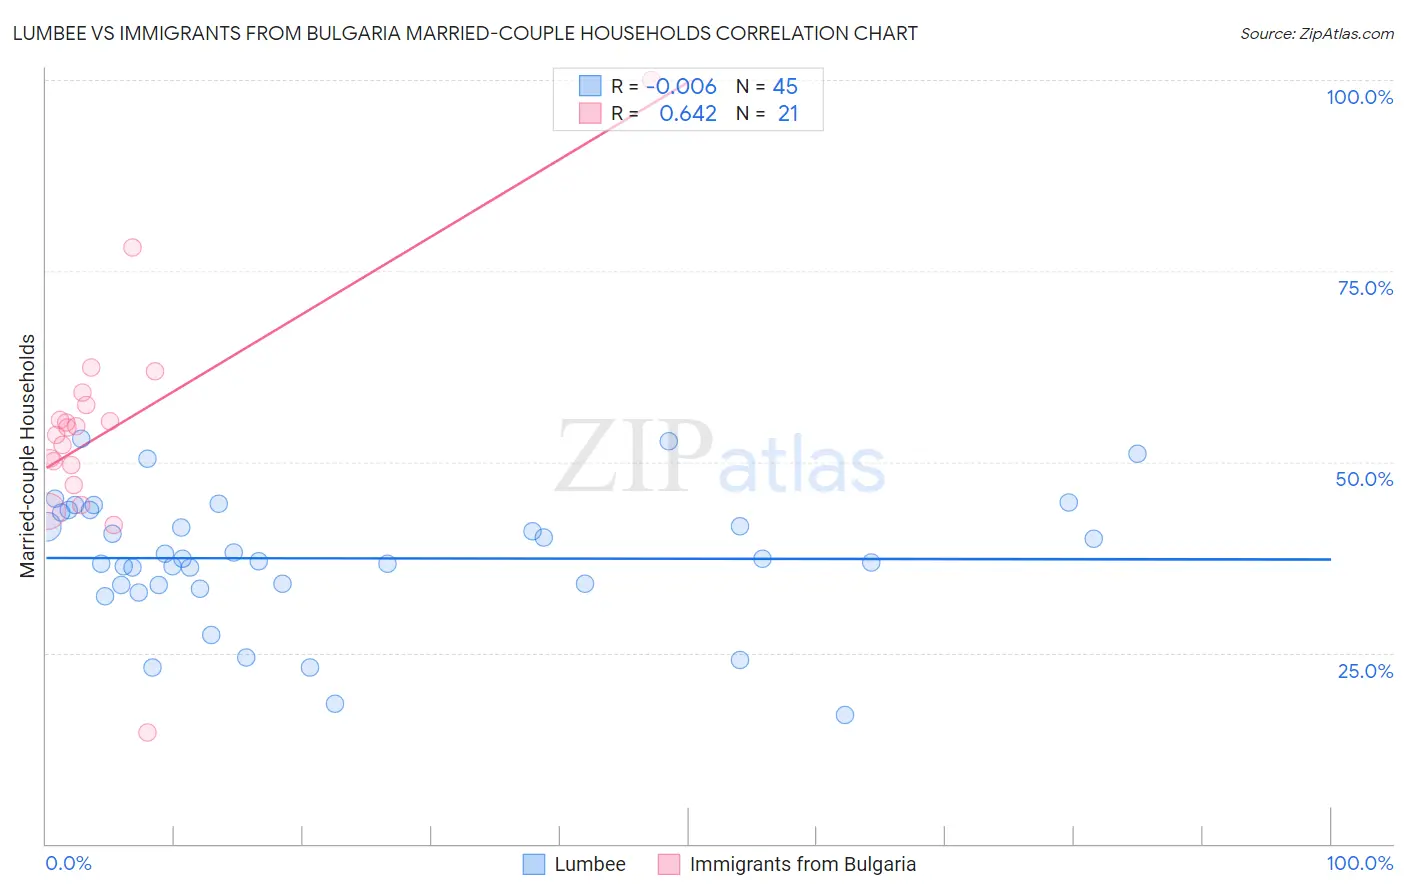 Lumbee vs Immigrants from Bulgaria Married-couple Households